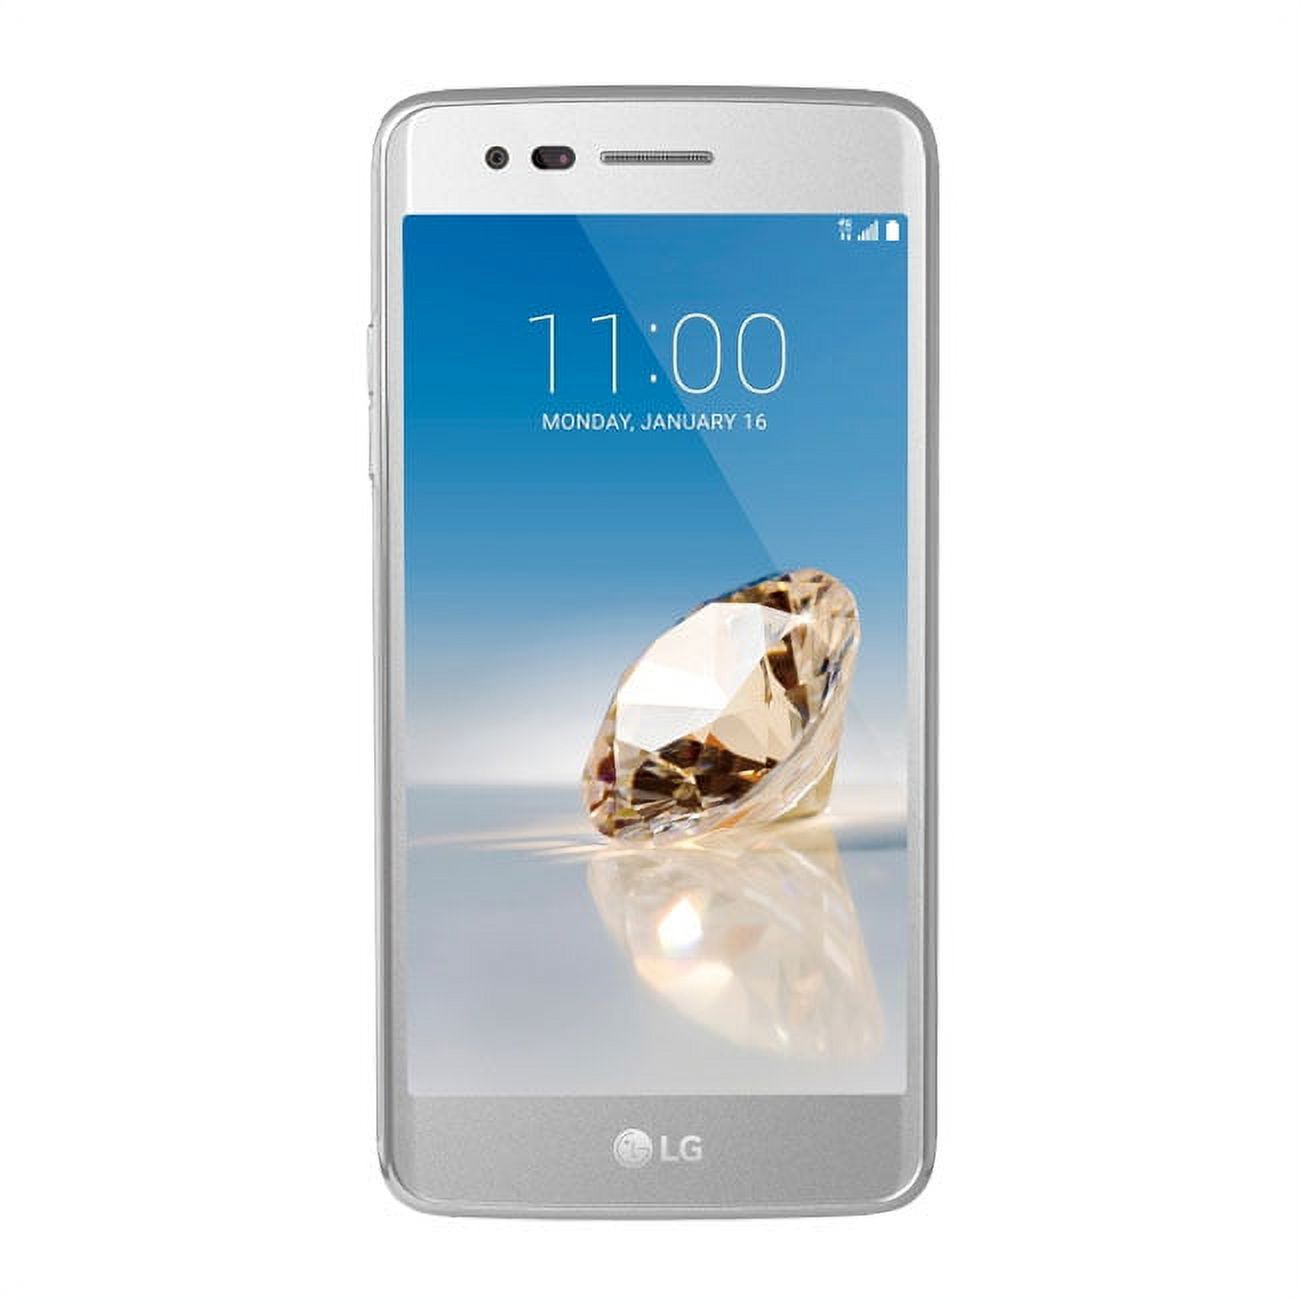 Pre-Owned LG Aristo M210 GSM (T-Mobile Unlocked) 16GB 5.0" Android Smartphone, Silver (Good) - image 1 of 5